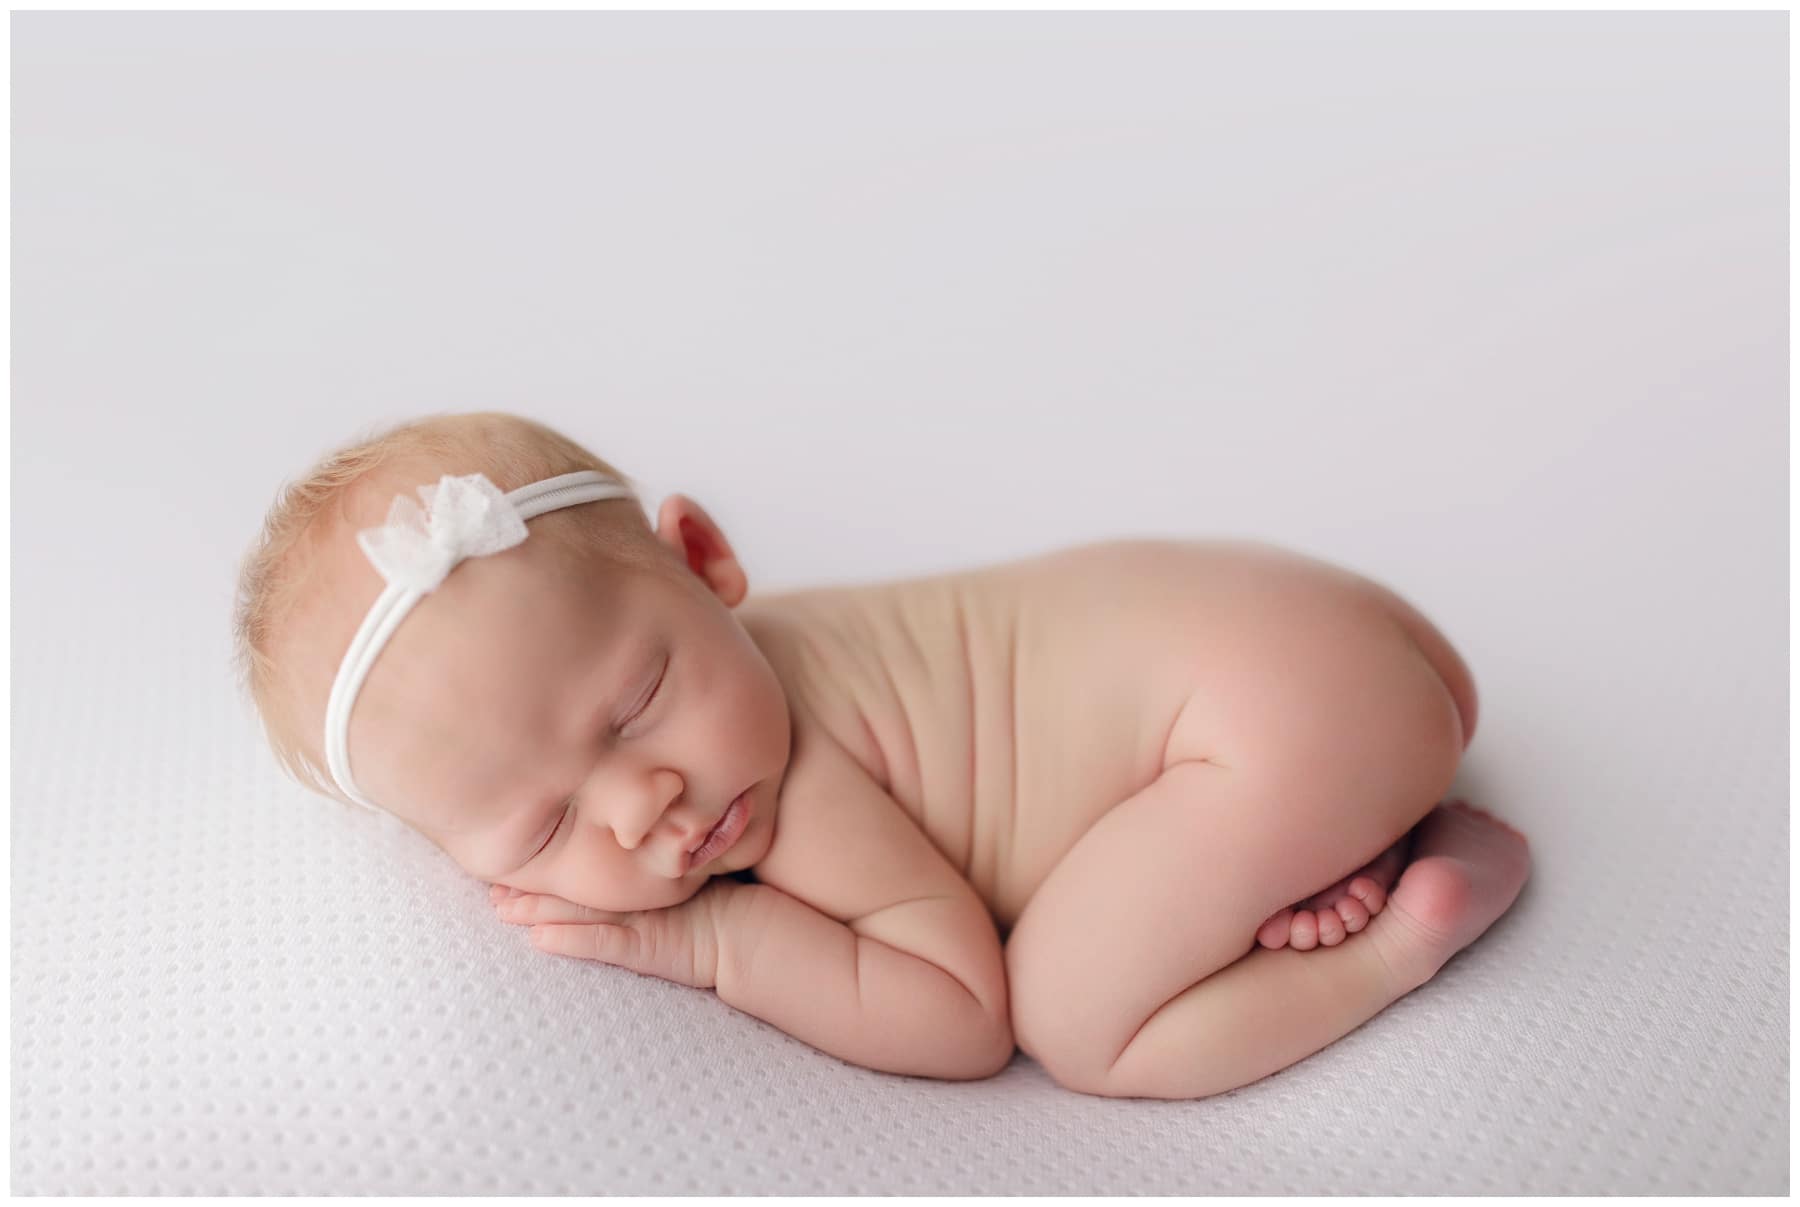 new baby photos ginger baby girl sleeping on whtie backdrop with simple white bow